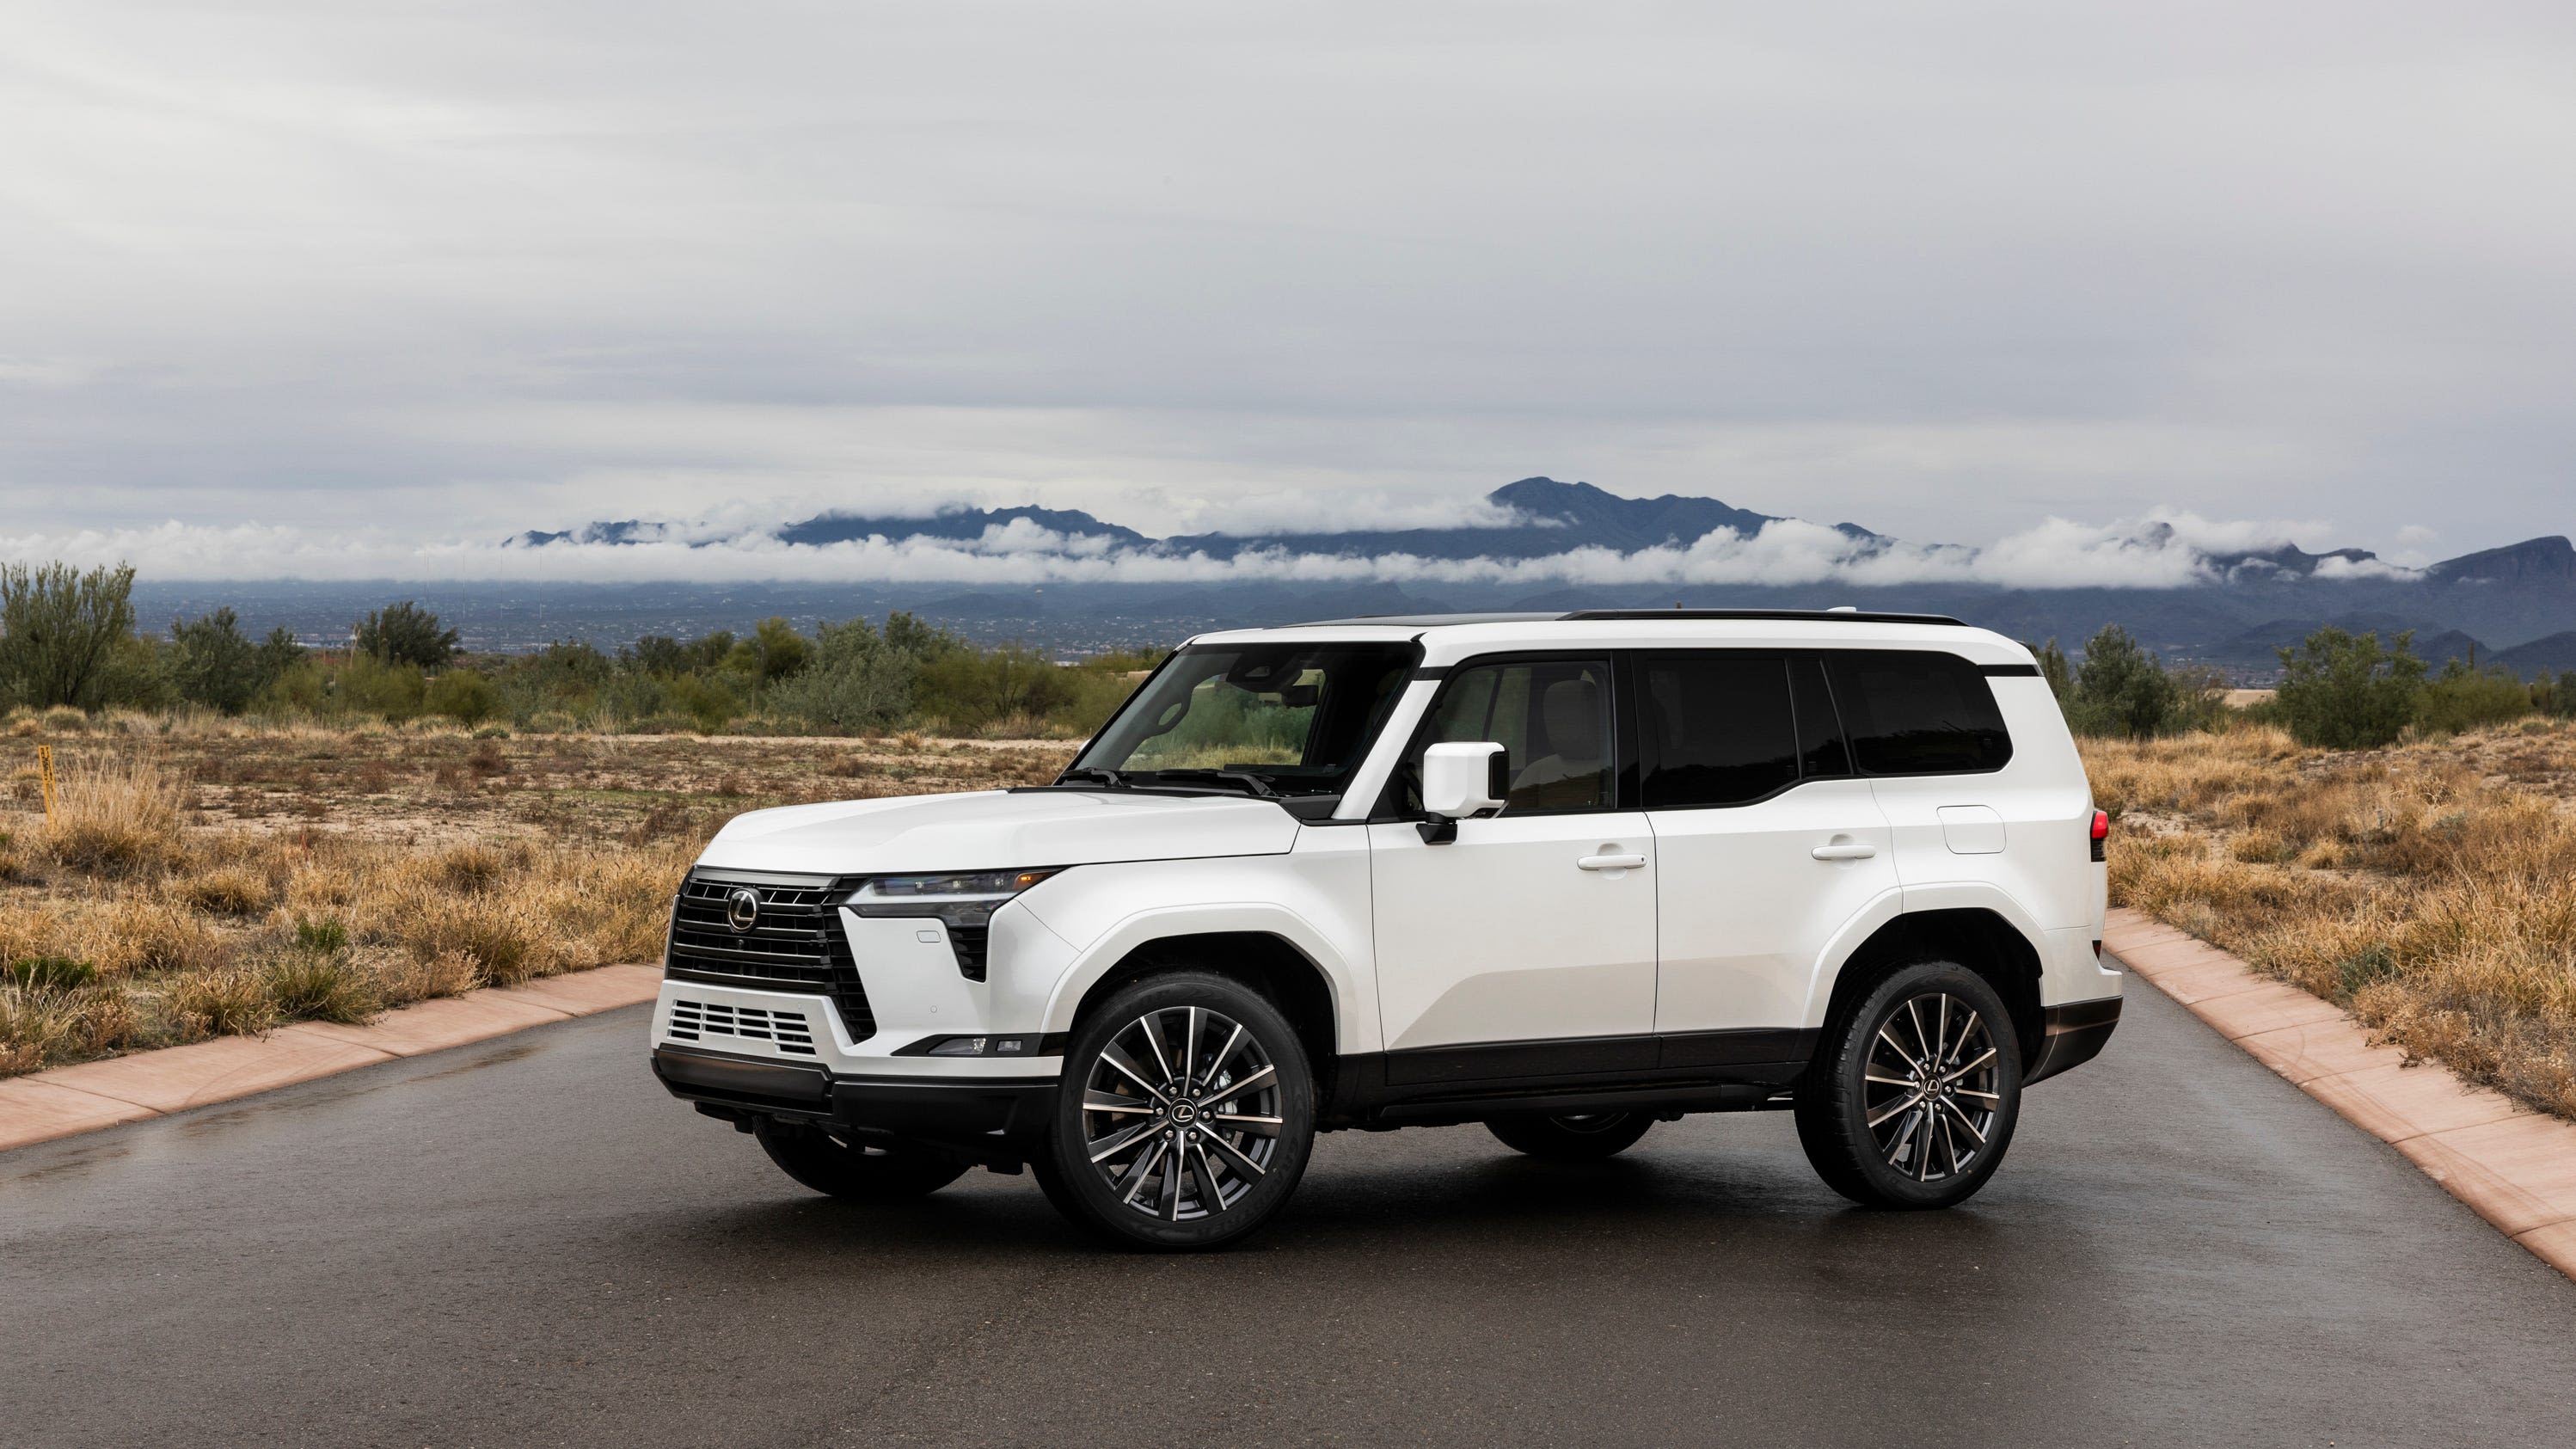 Which is the better SUV? Toyota Land Cruiser vs. Lexus GX